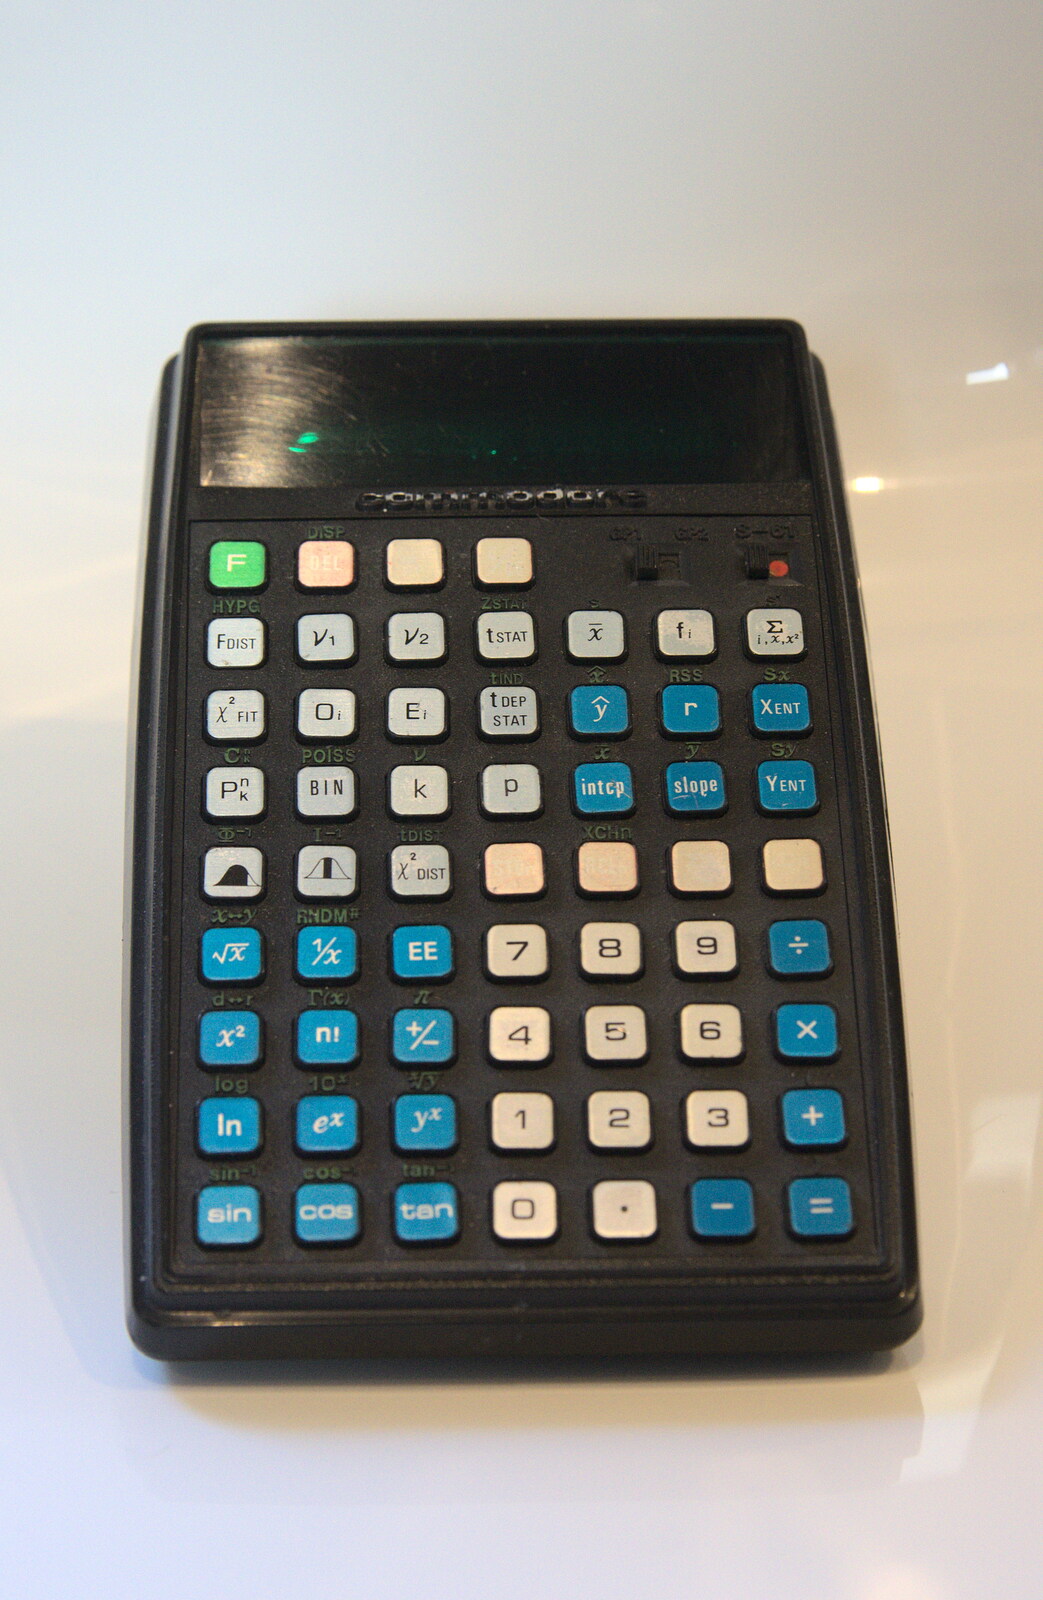 A Commodore 'button monster' calculator from Fred's Shop, Brome, Suffolk - 20th September 2014